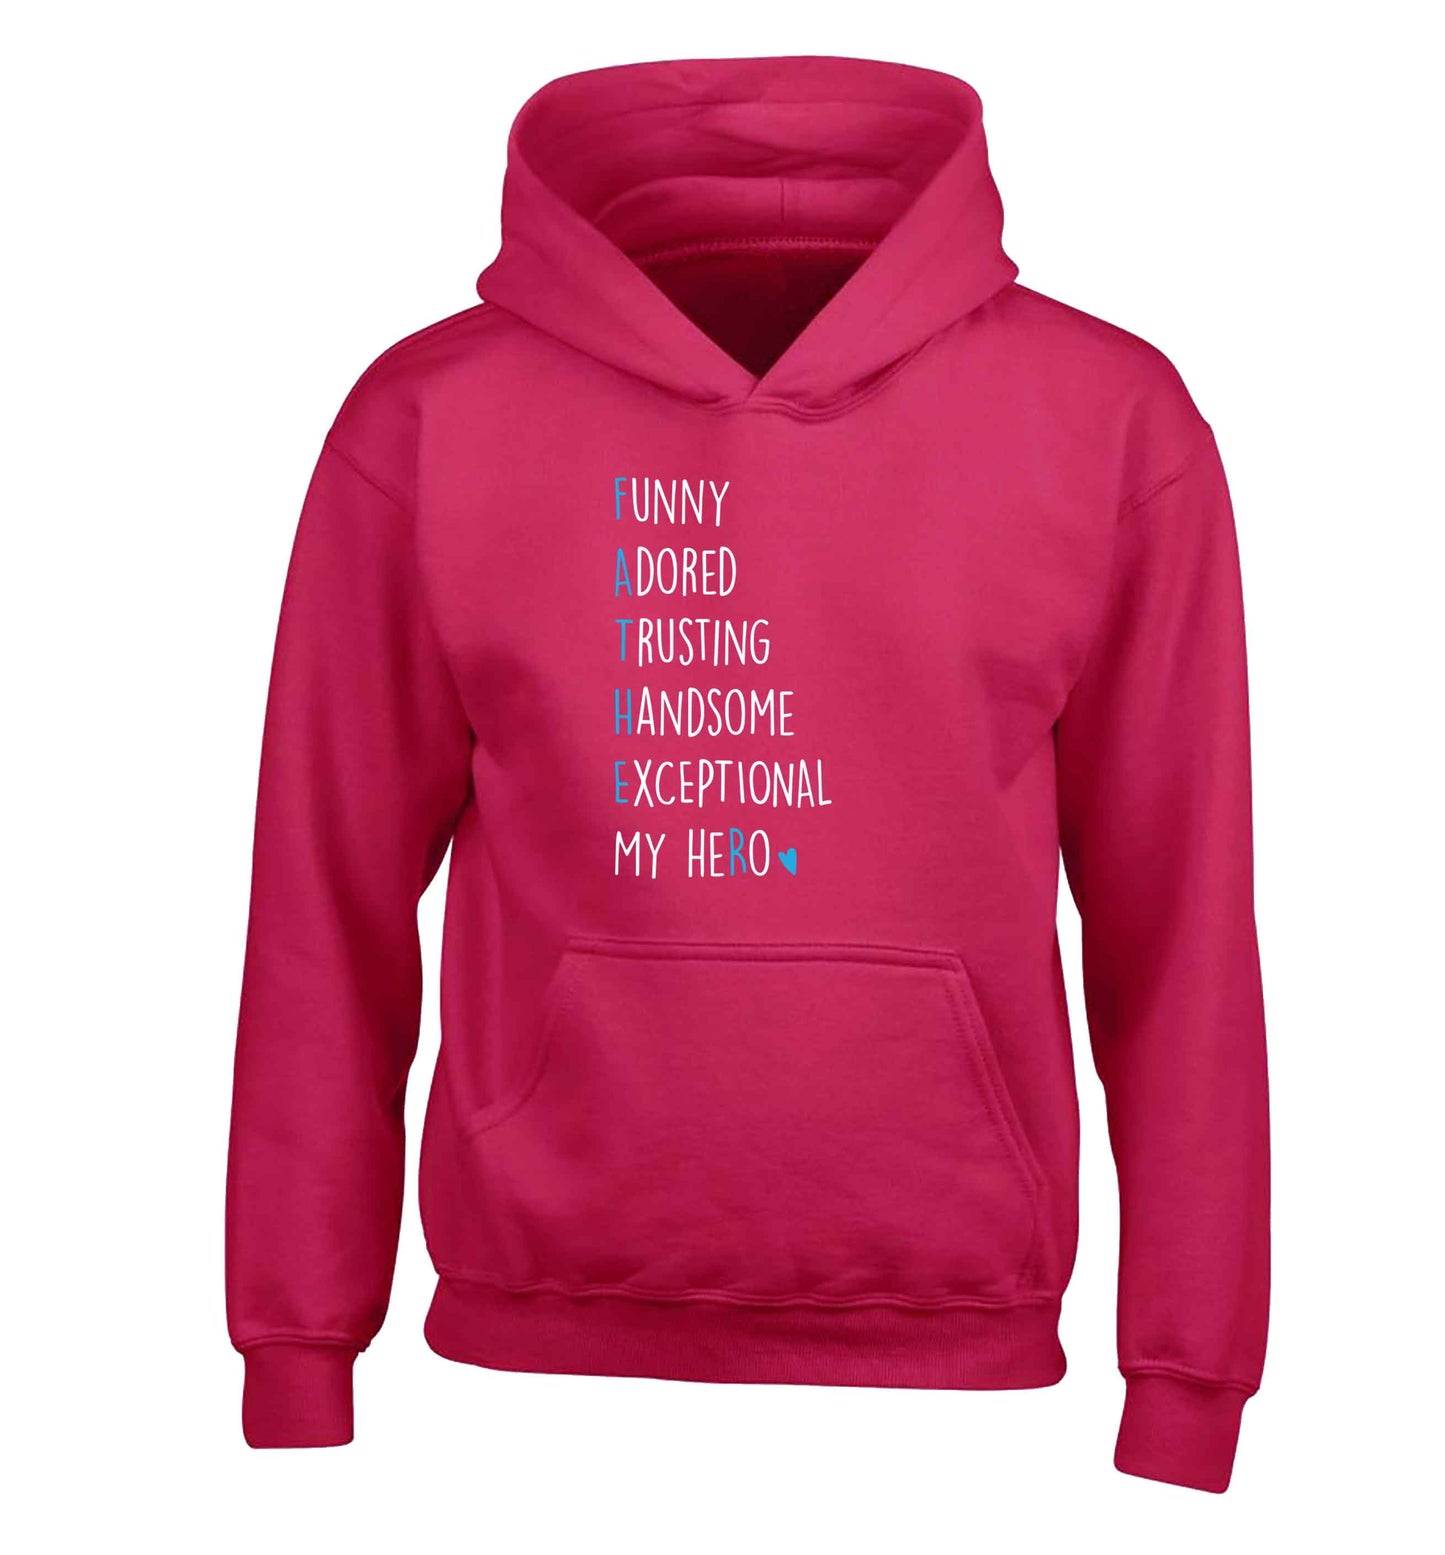 Father, funny adored trusting handsome exceptional my hero children's pink hoodie 12-13 Years